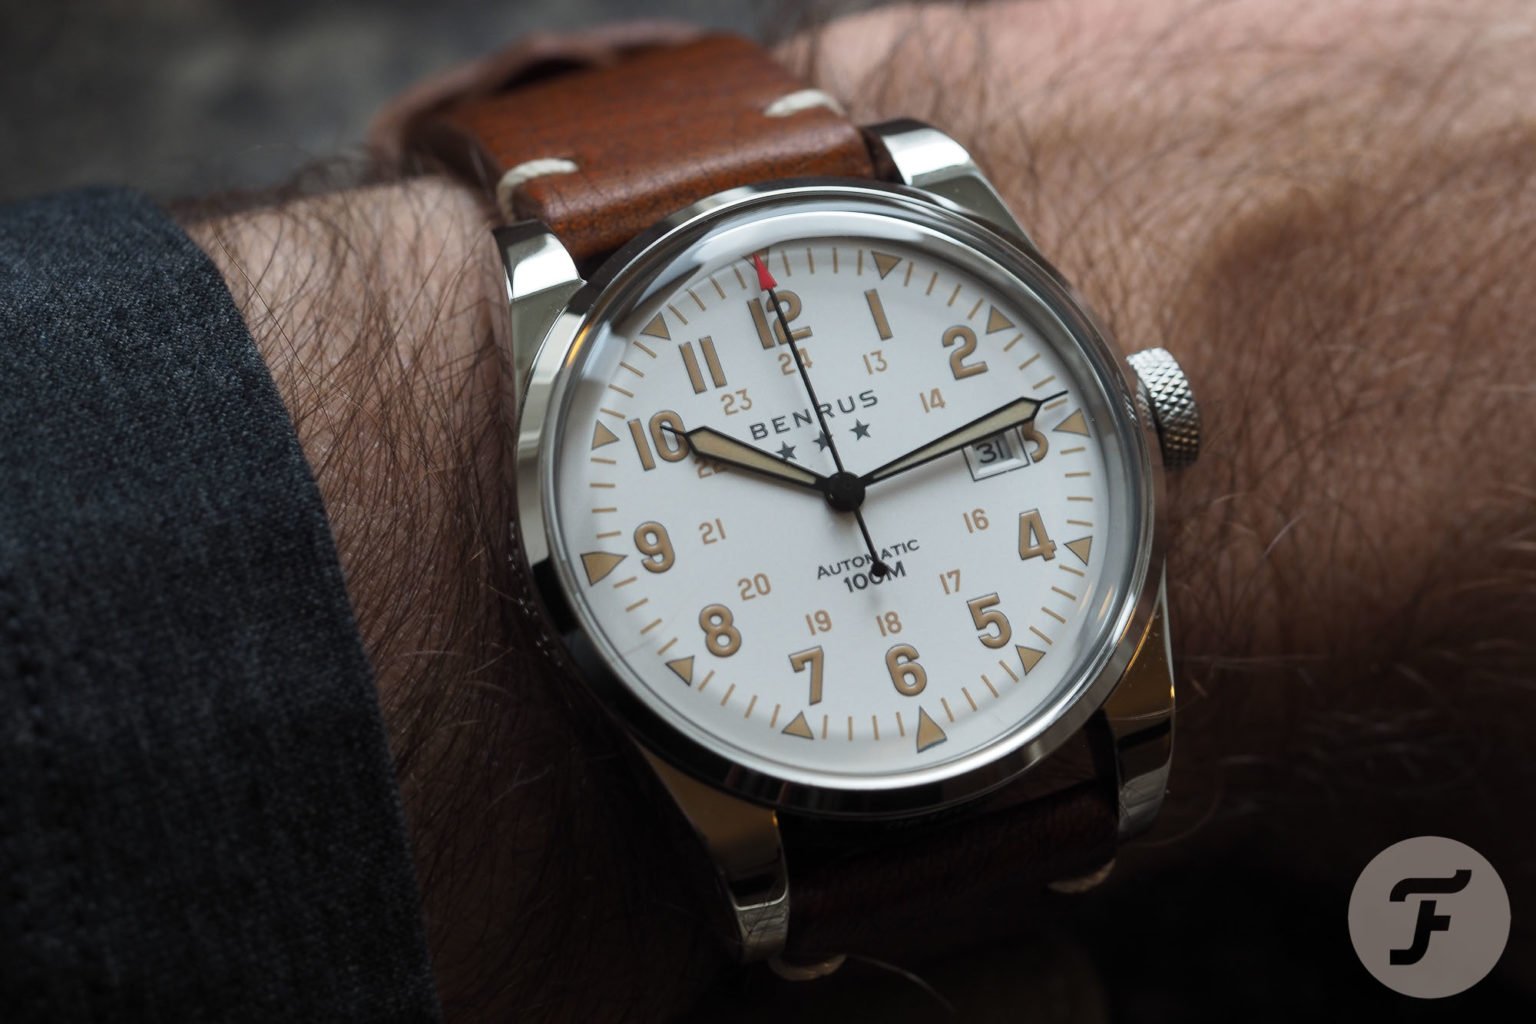 Hands-On: Benrus Field Watch From the Heritage Collection